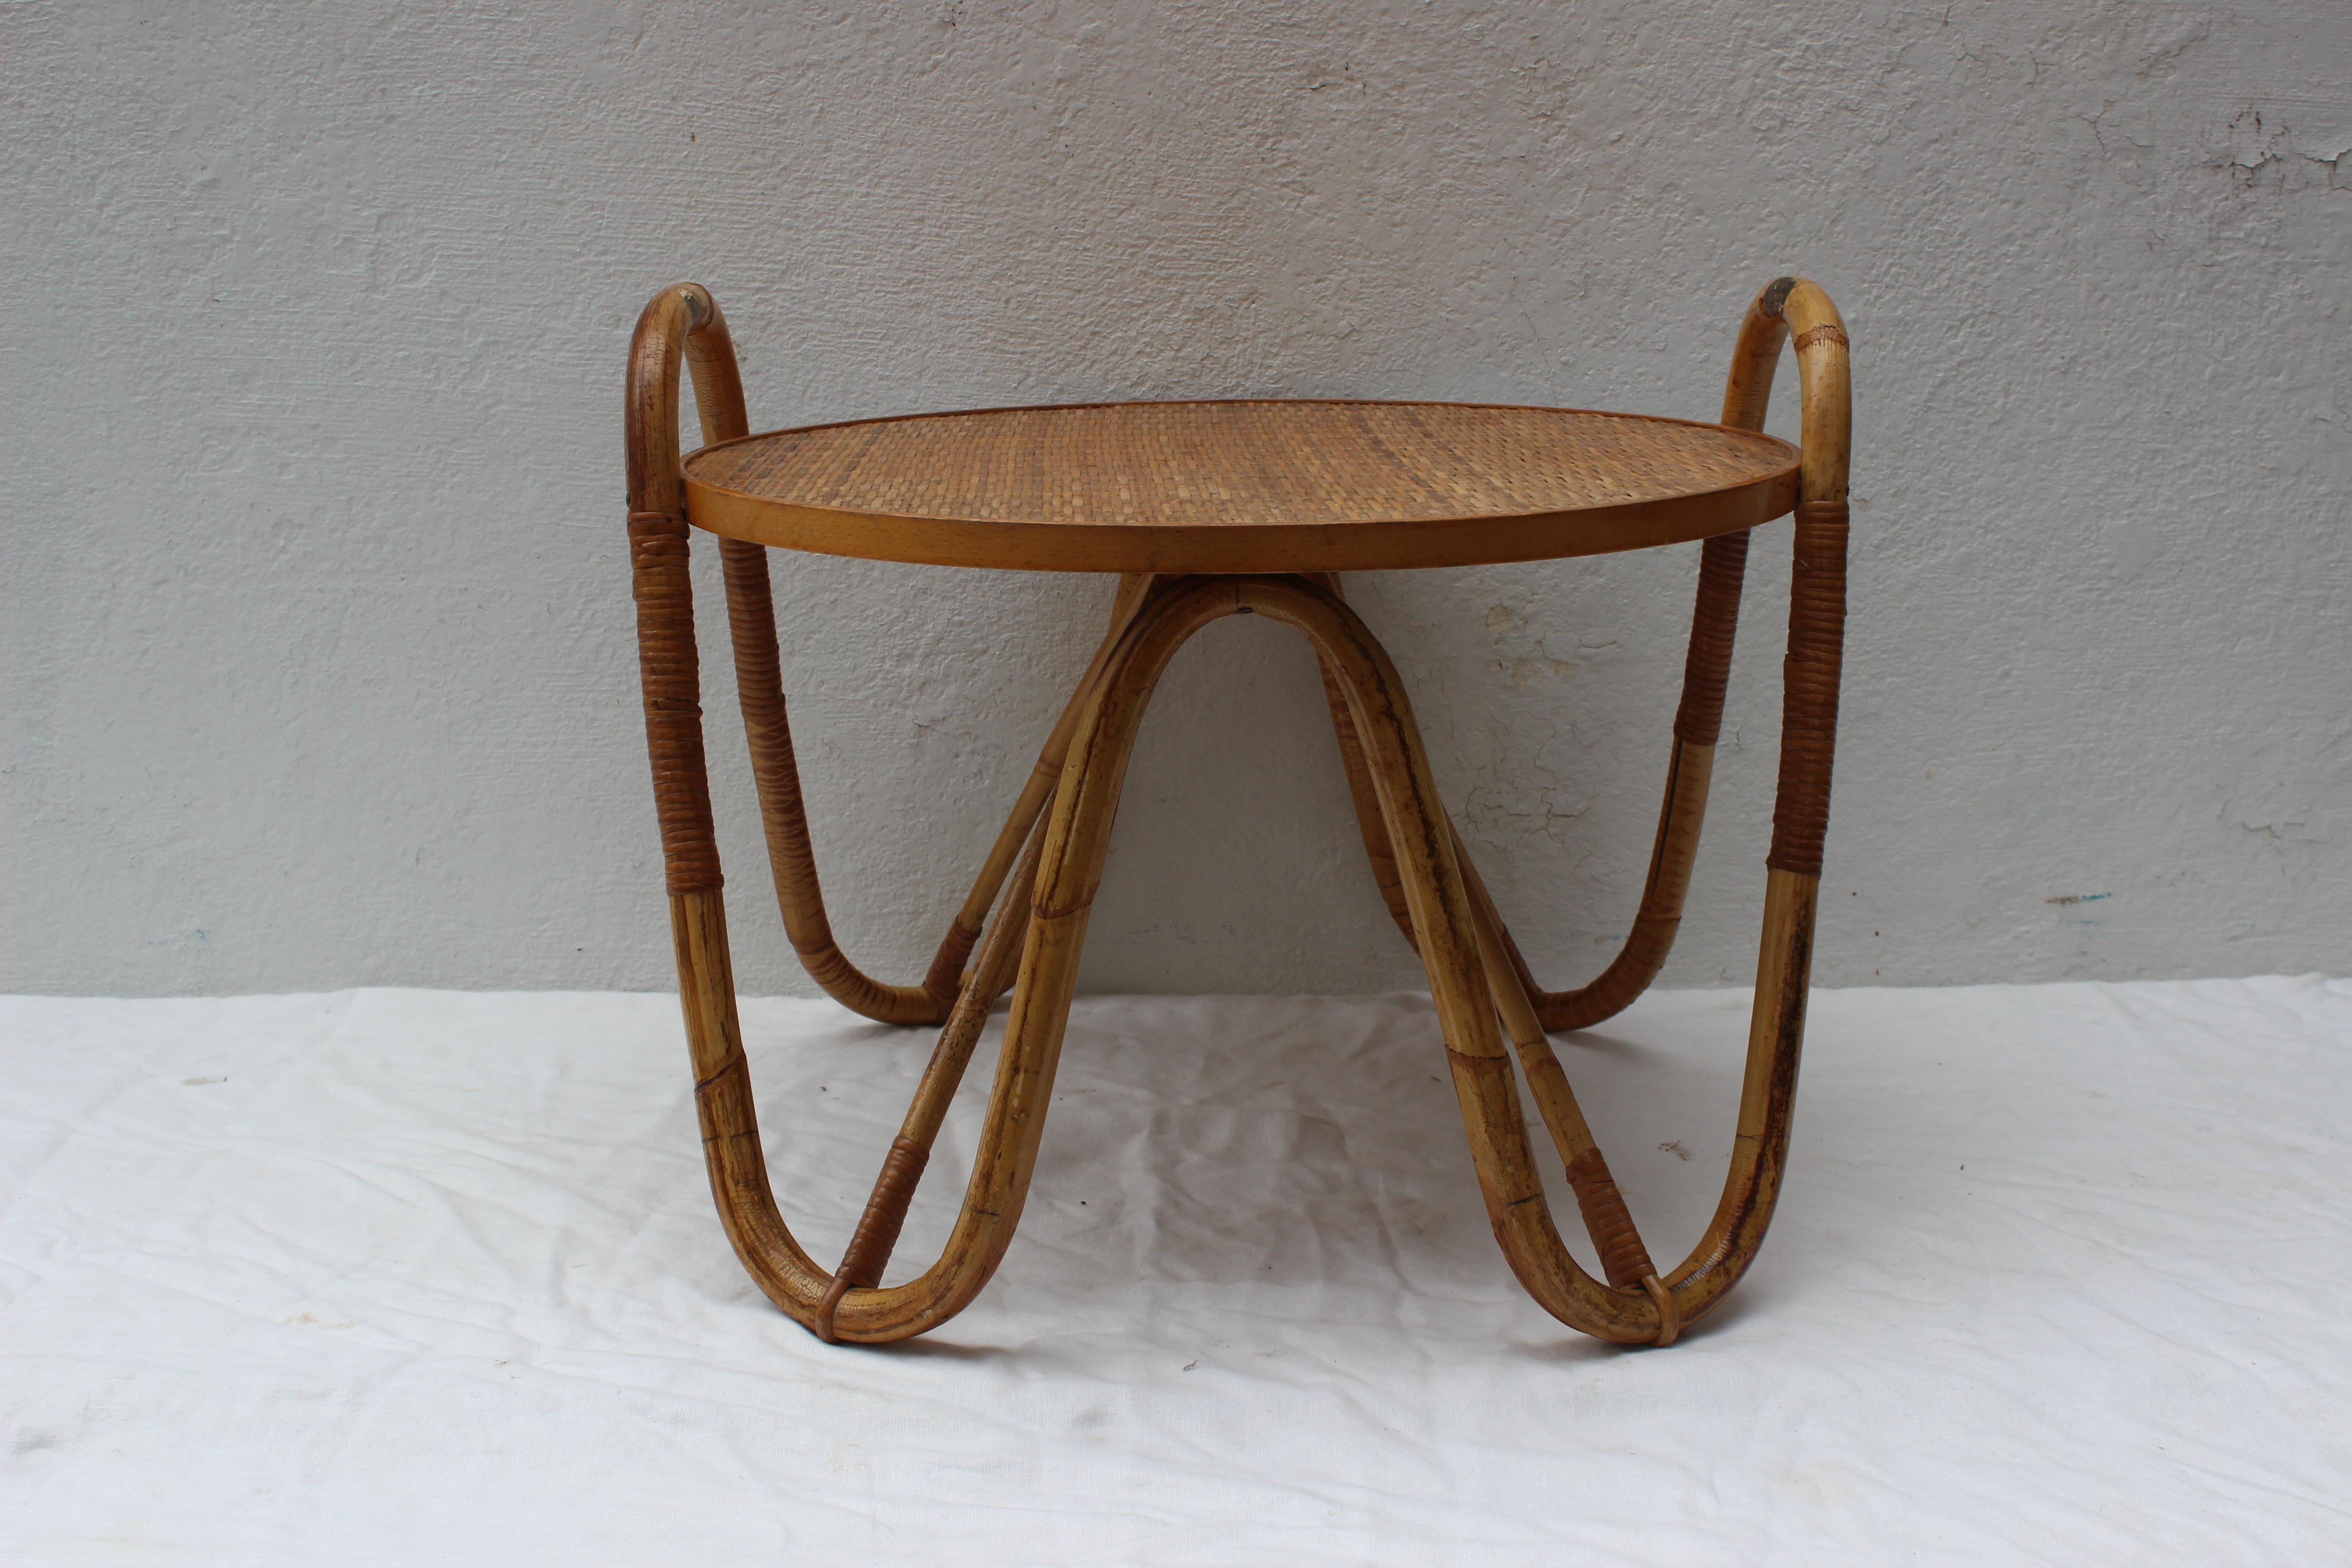 French rattan coffee table in the style of Jean Royère

Measures: Tabletop diameter 23.25